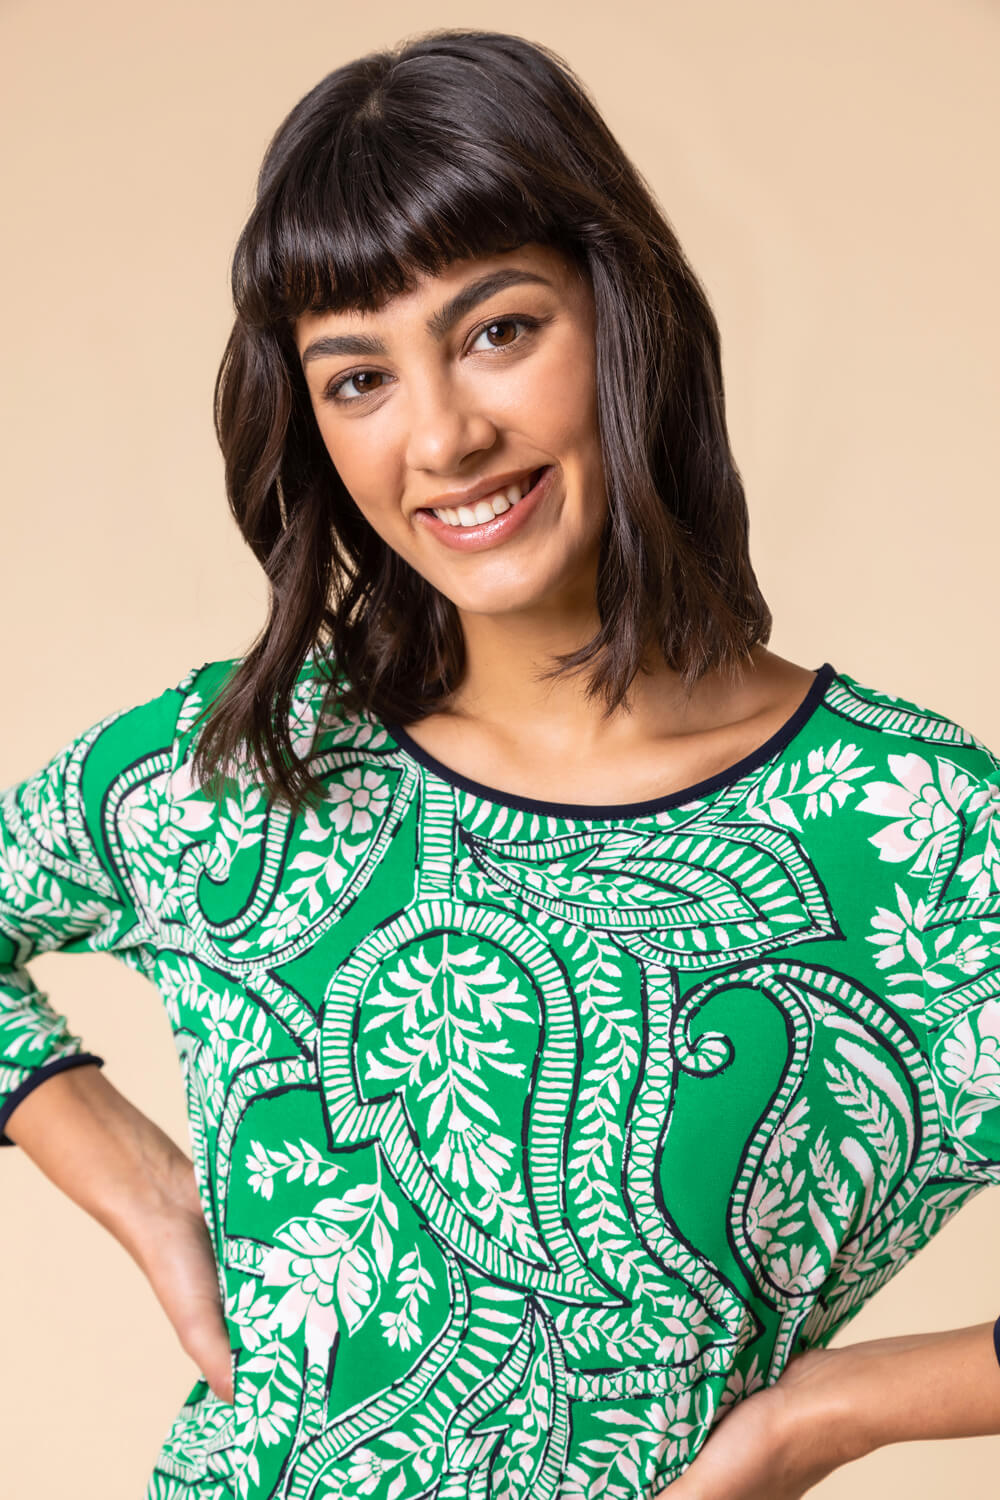 Green Paisley Print Contrast Trim Tunic Top, Image 4 of 4